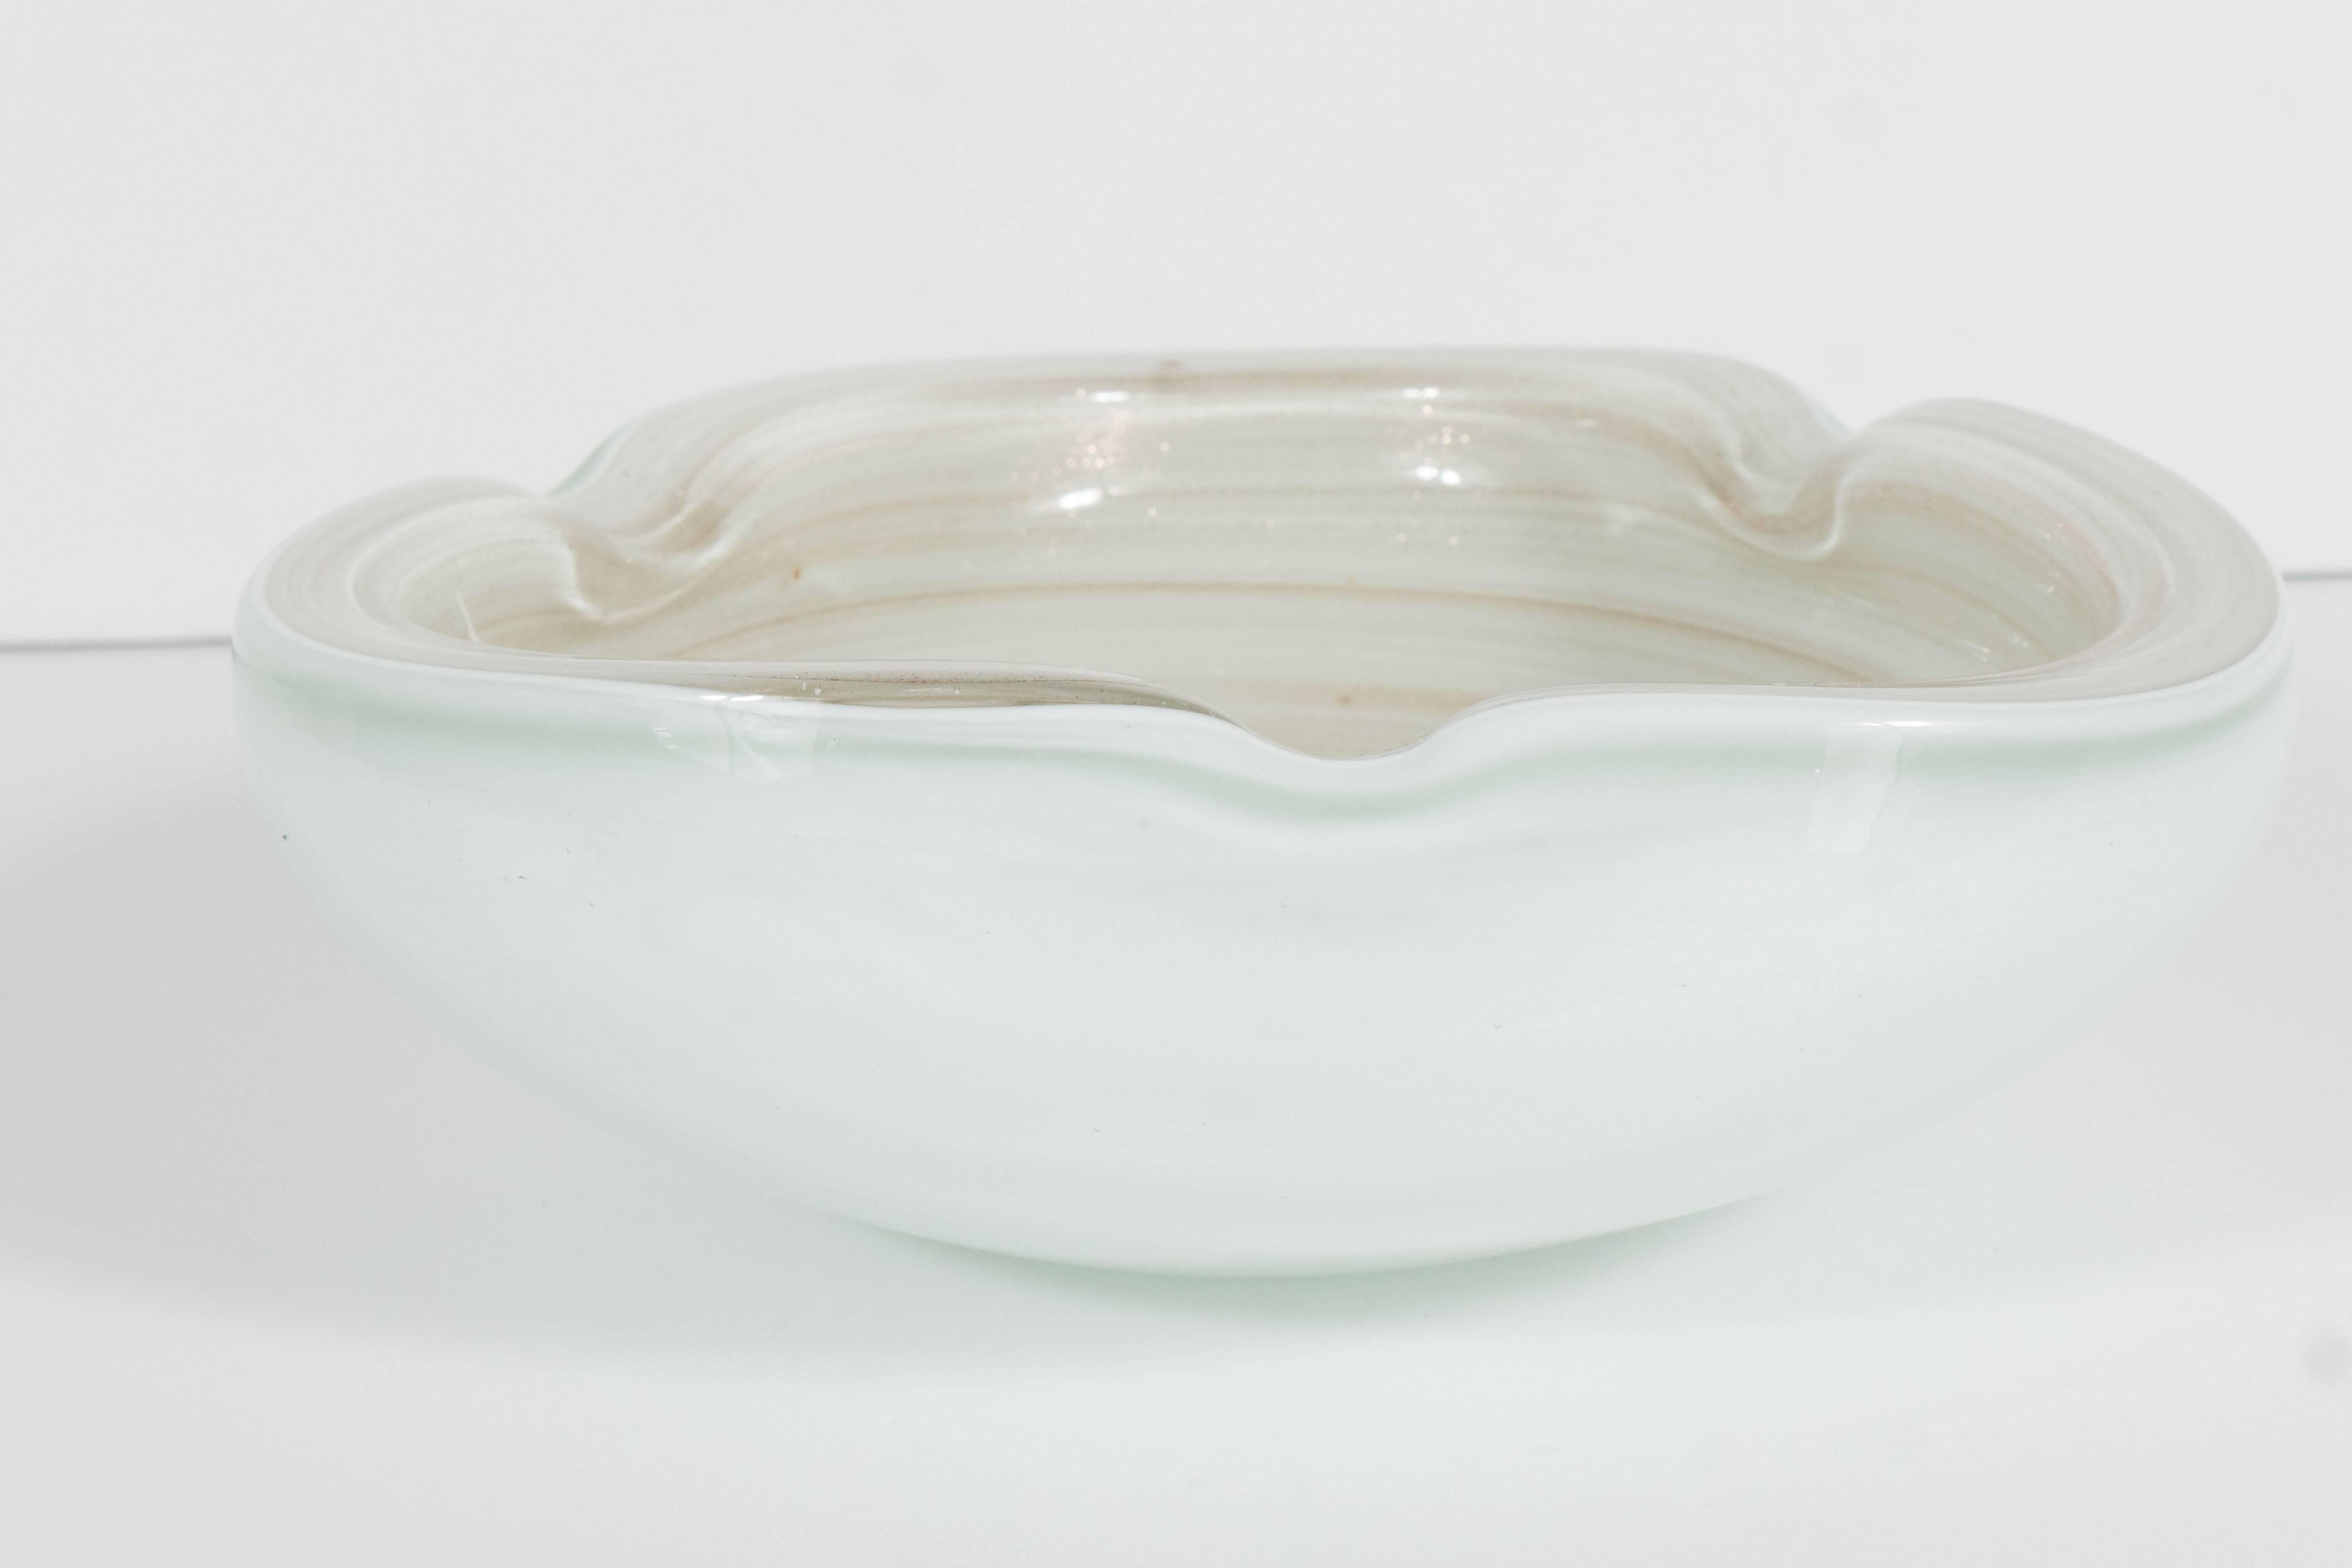 A three-sided handblown Murano glass ashtray in swirling hues of ivory and cream. This stunning piece has swirls of 24-karat rose gold throughout. This piece is in excellent condition.